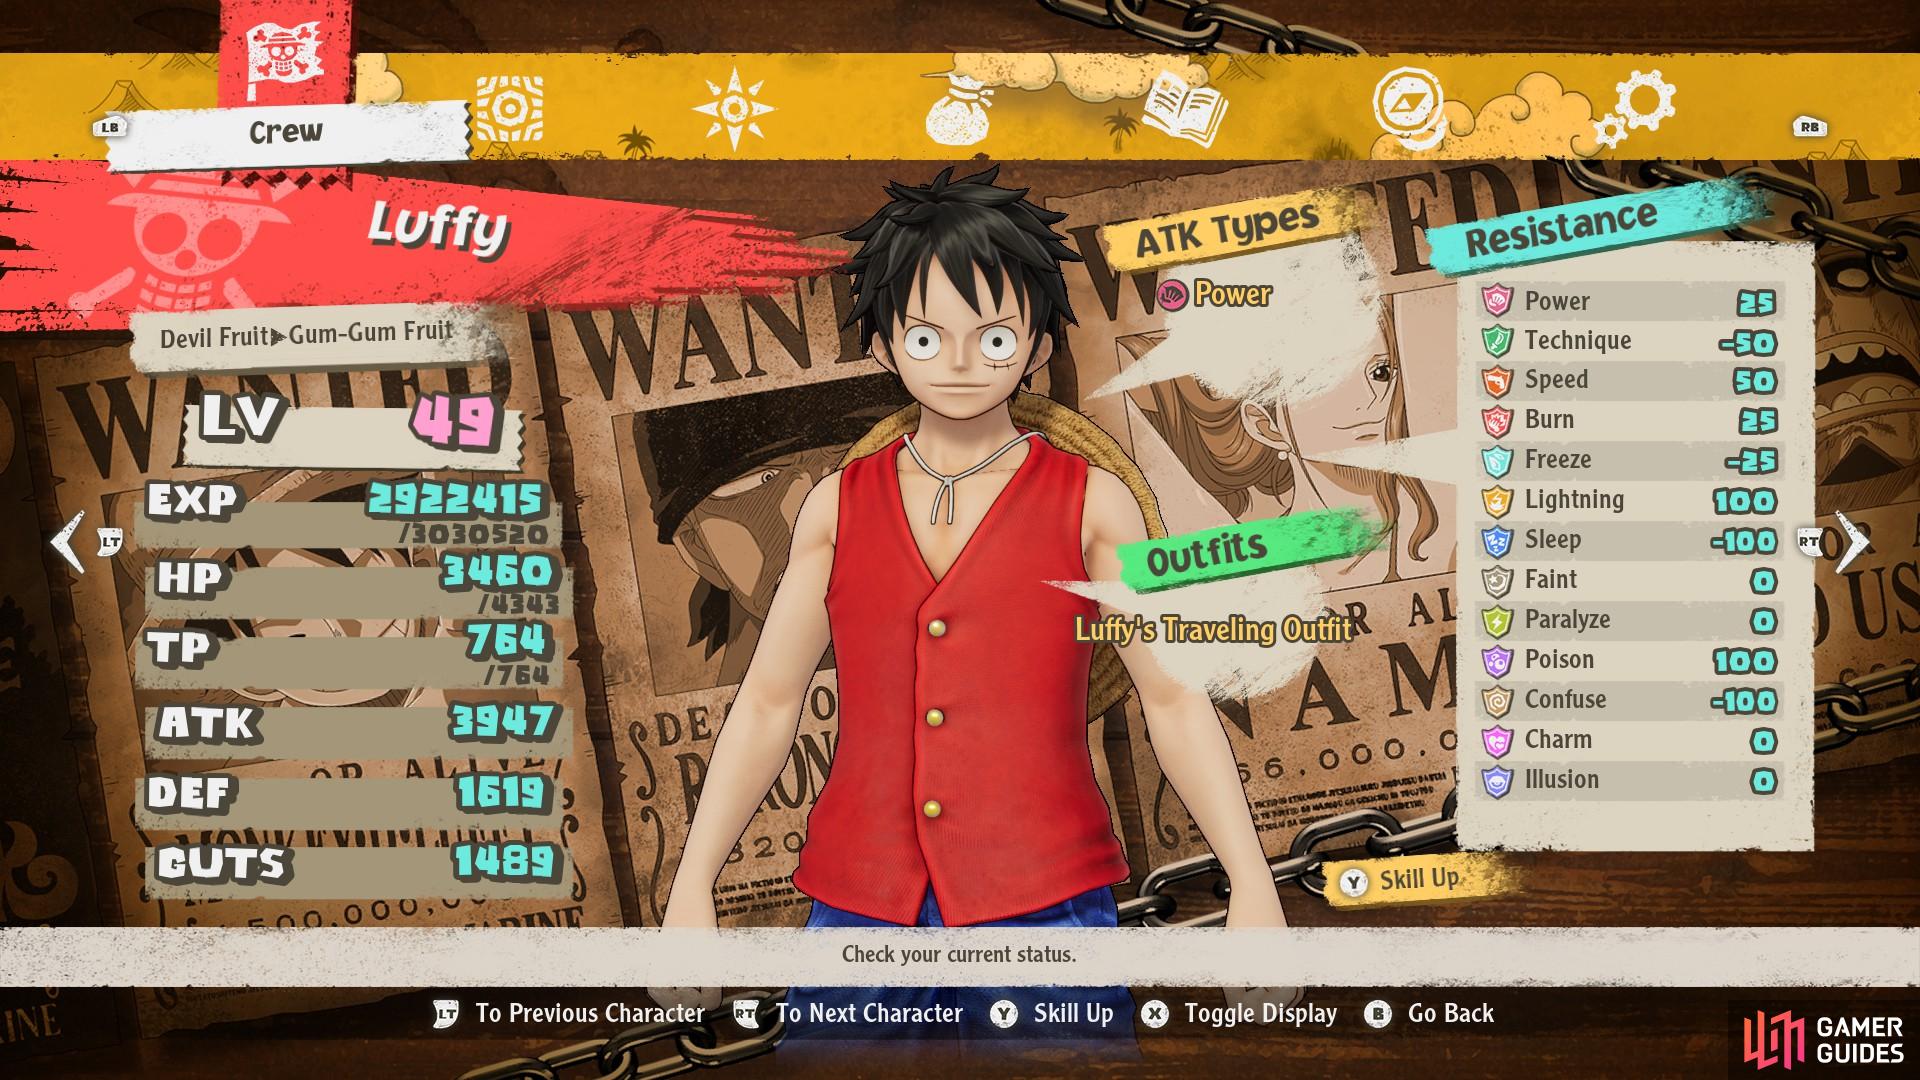 Here is a closer look at the One Piece Odyssey stats and their meanings.